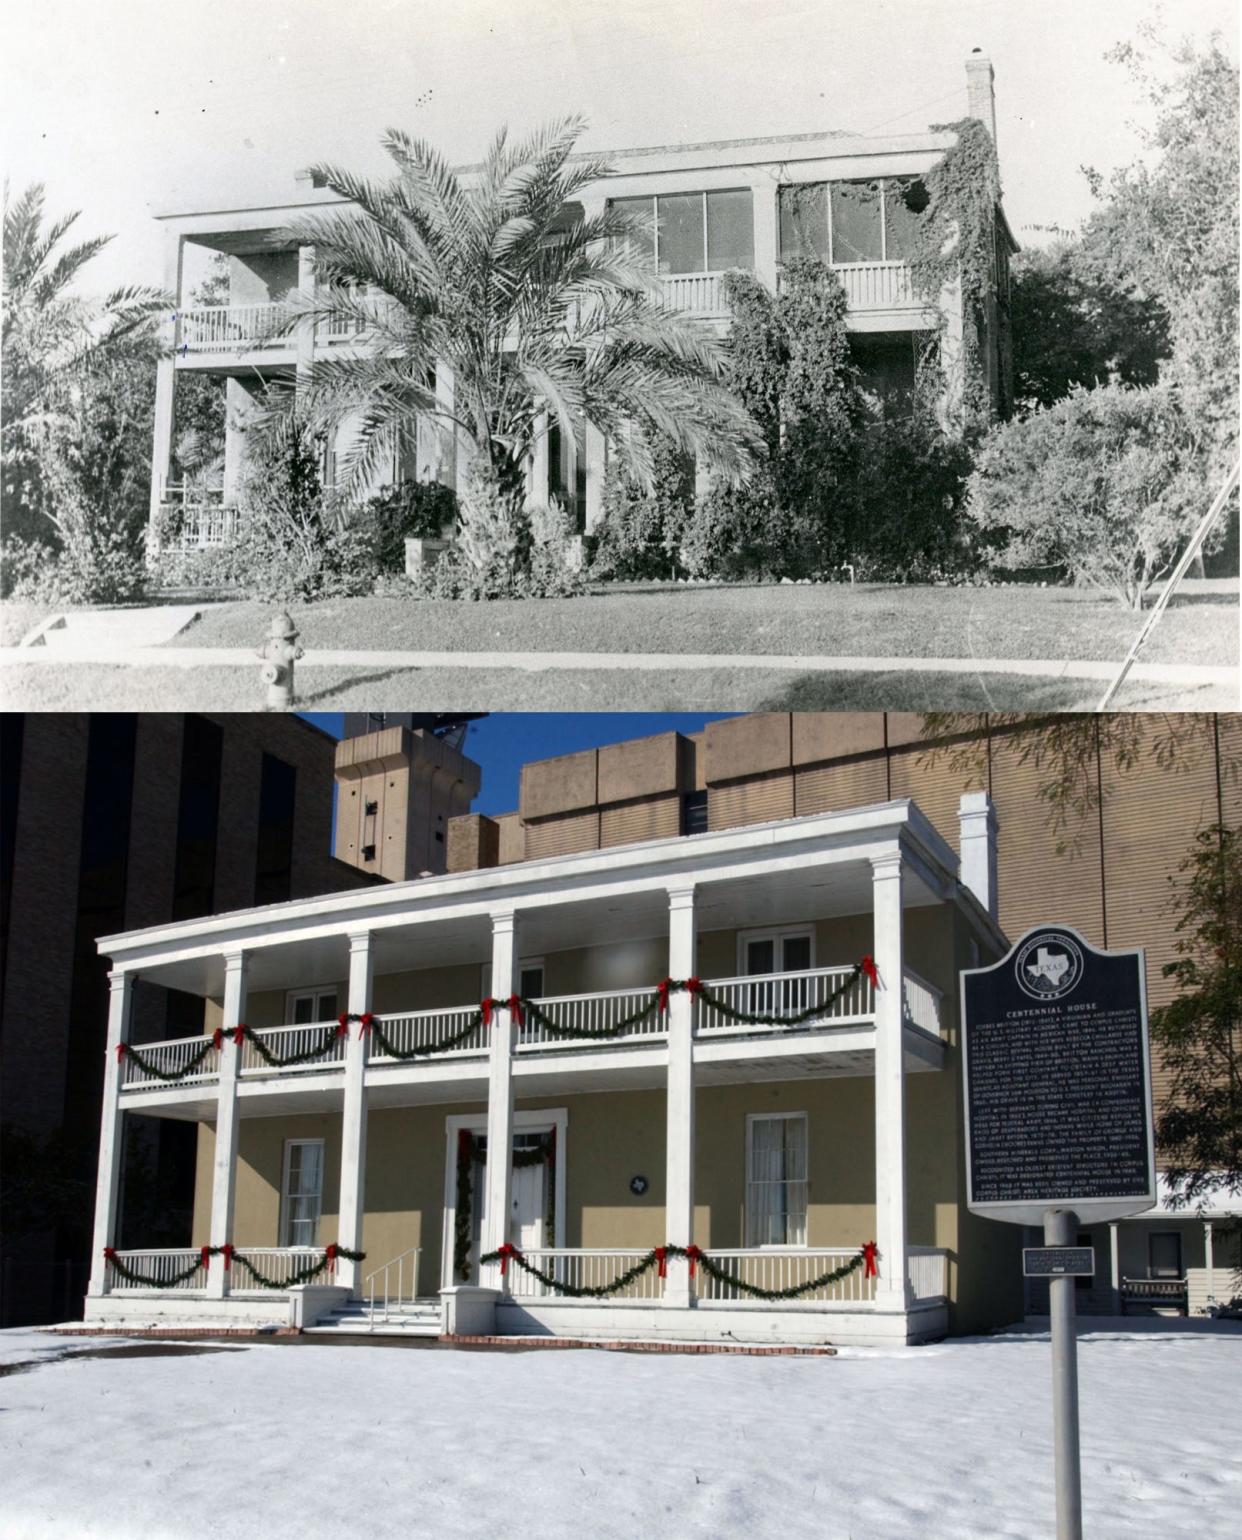 TOP: The Centennial House at 411 N. Upper Broadway was becoming shrouded in vegetation in this undated photo. The home was purchased for restoration by the Corpus Christi Area Heritage Society in 1965. BOTTOM: Caller-TImes photographer George Tuley shot this photo of the Centennial House on Dec. 25, 2004, after the snowfall.